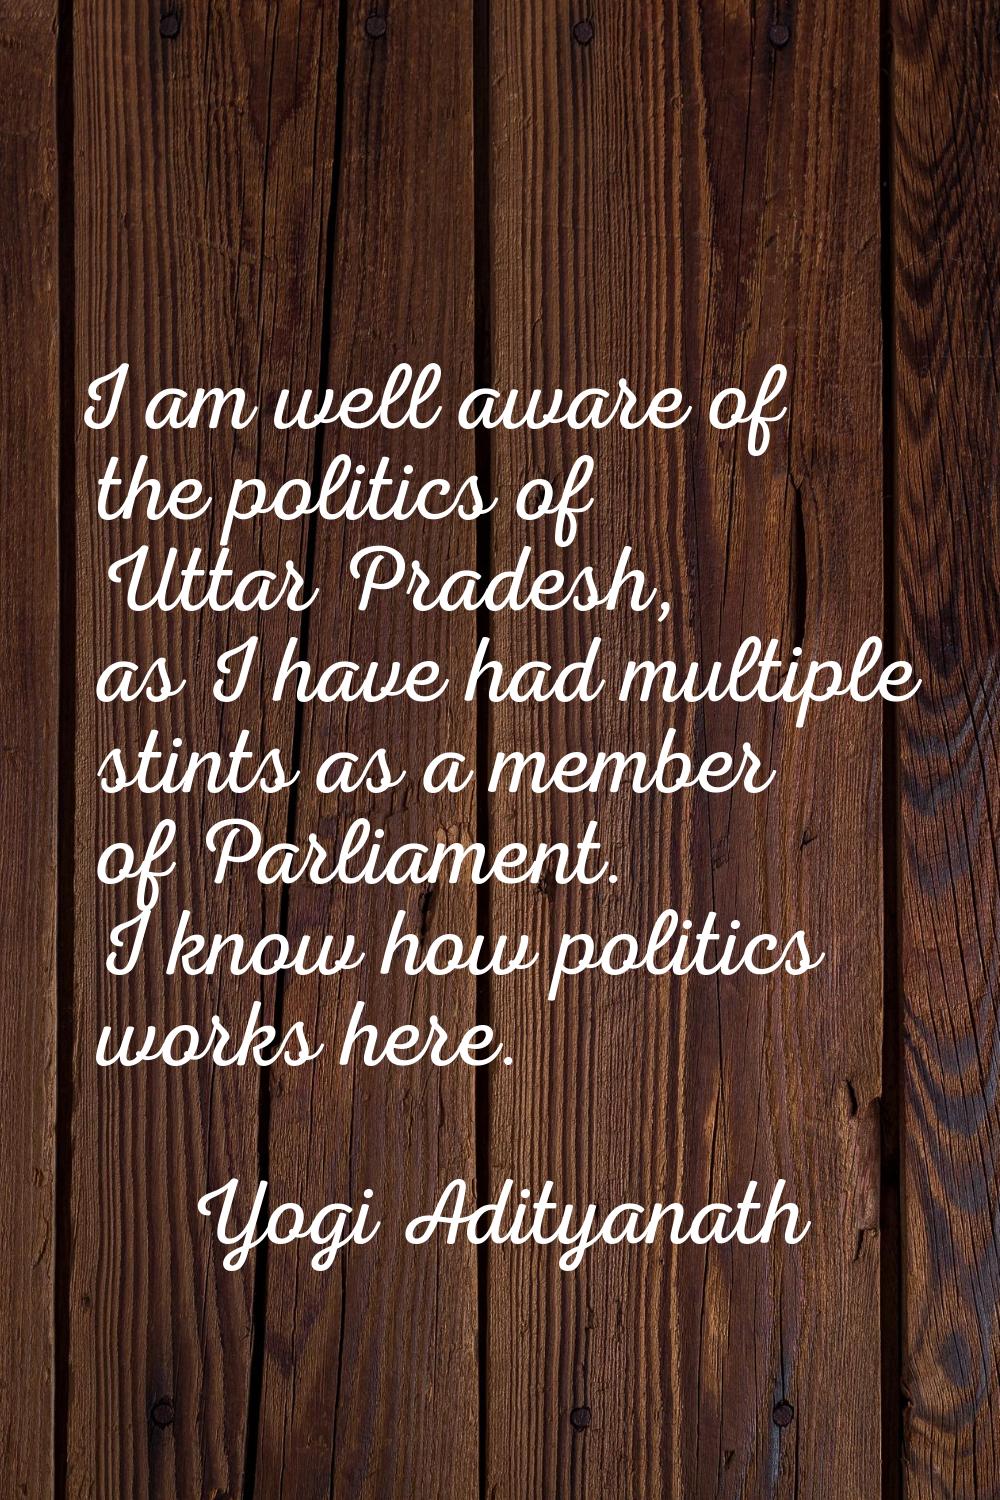 I am well aware of the politics of Uttar Pradesh, as I have had multiple stints as a member of Parl